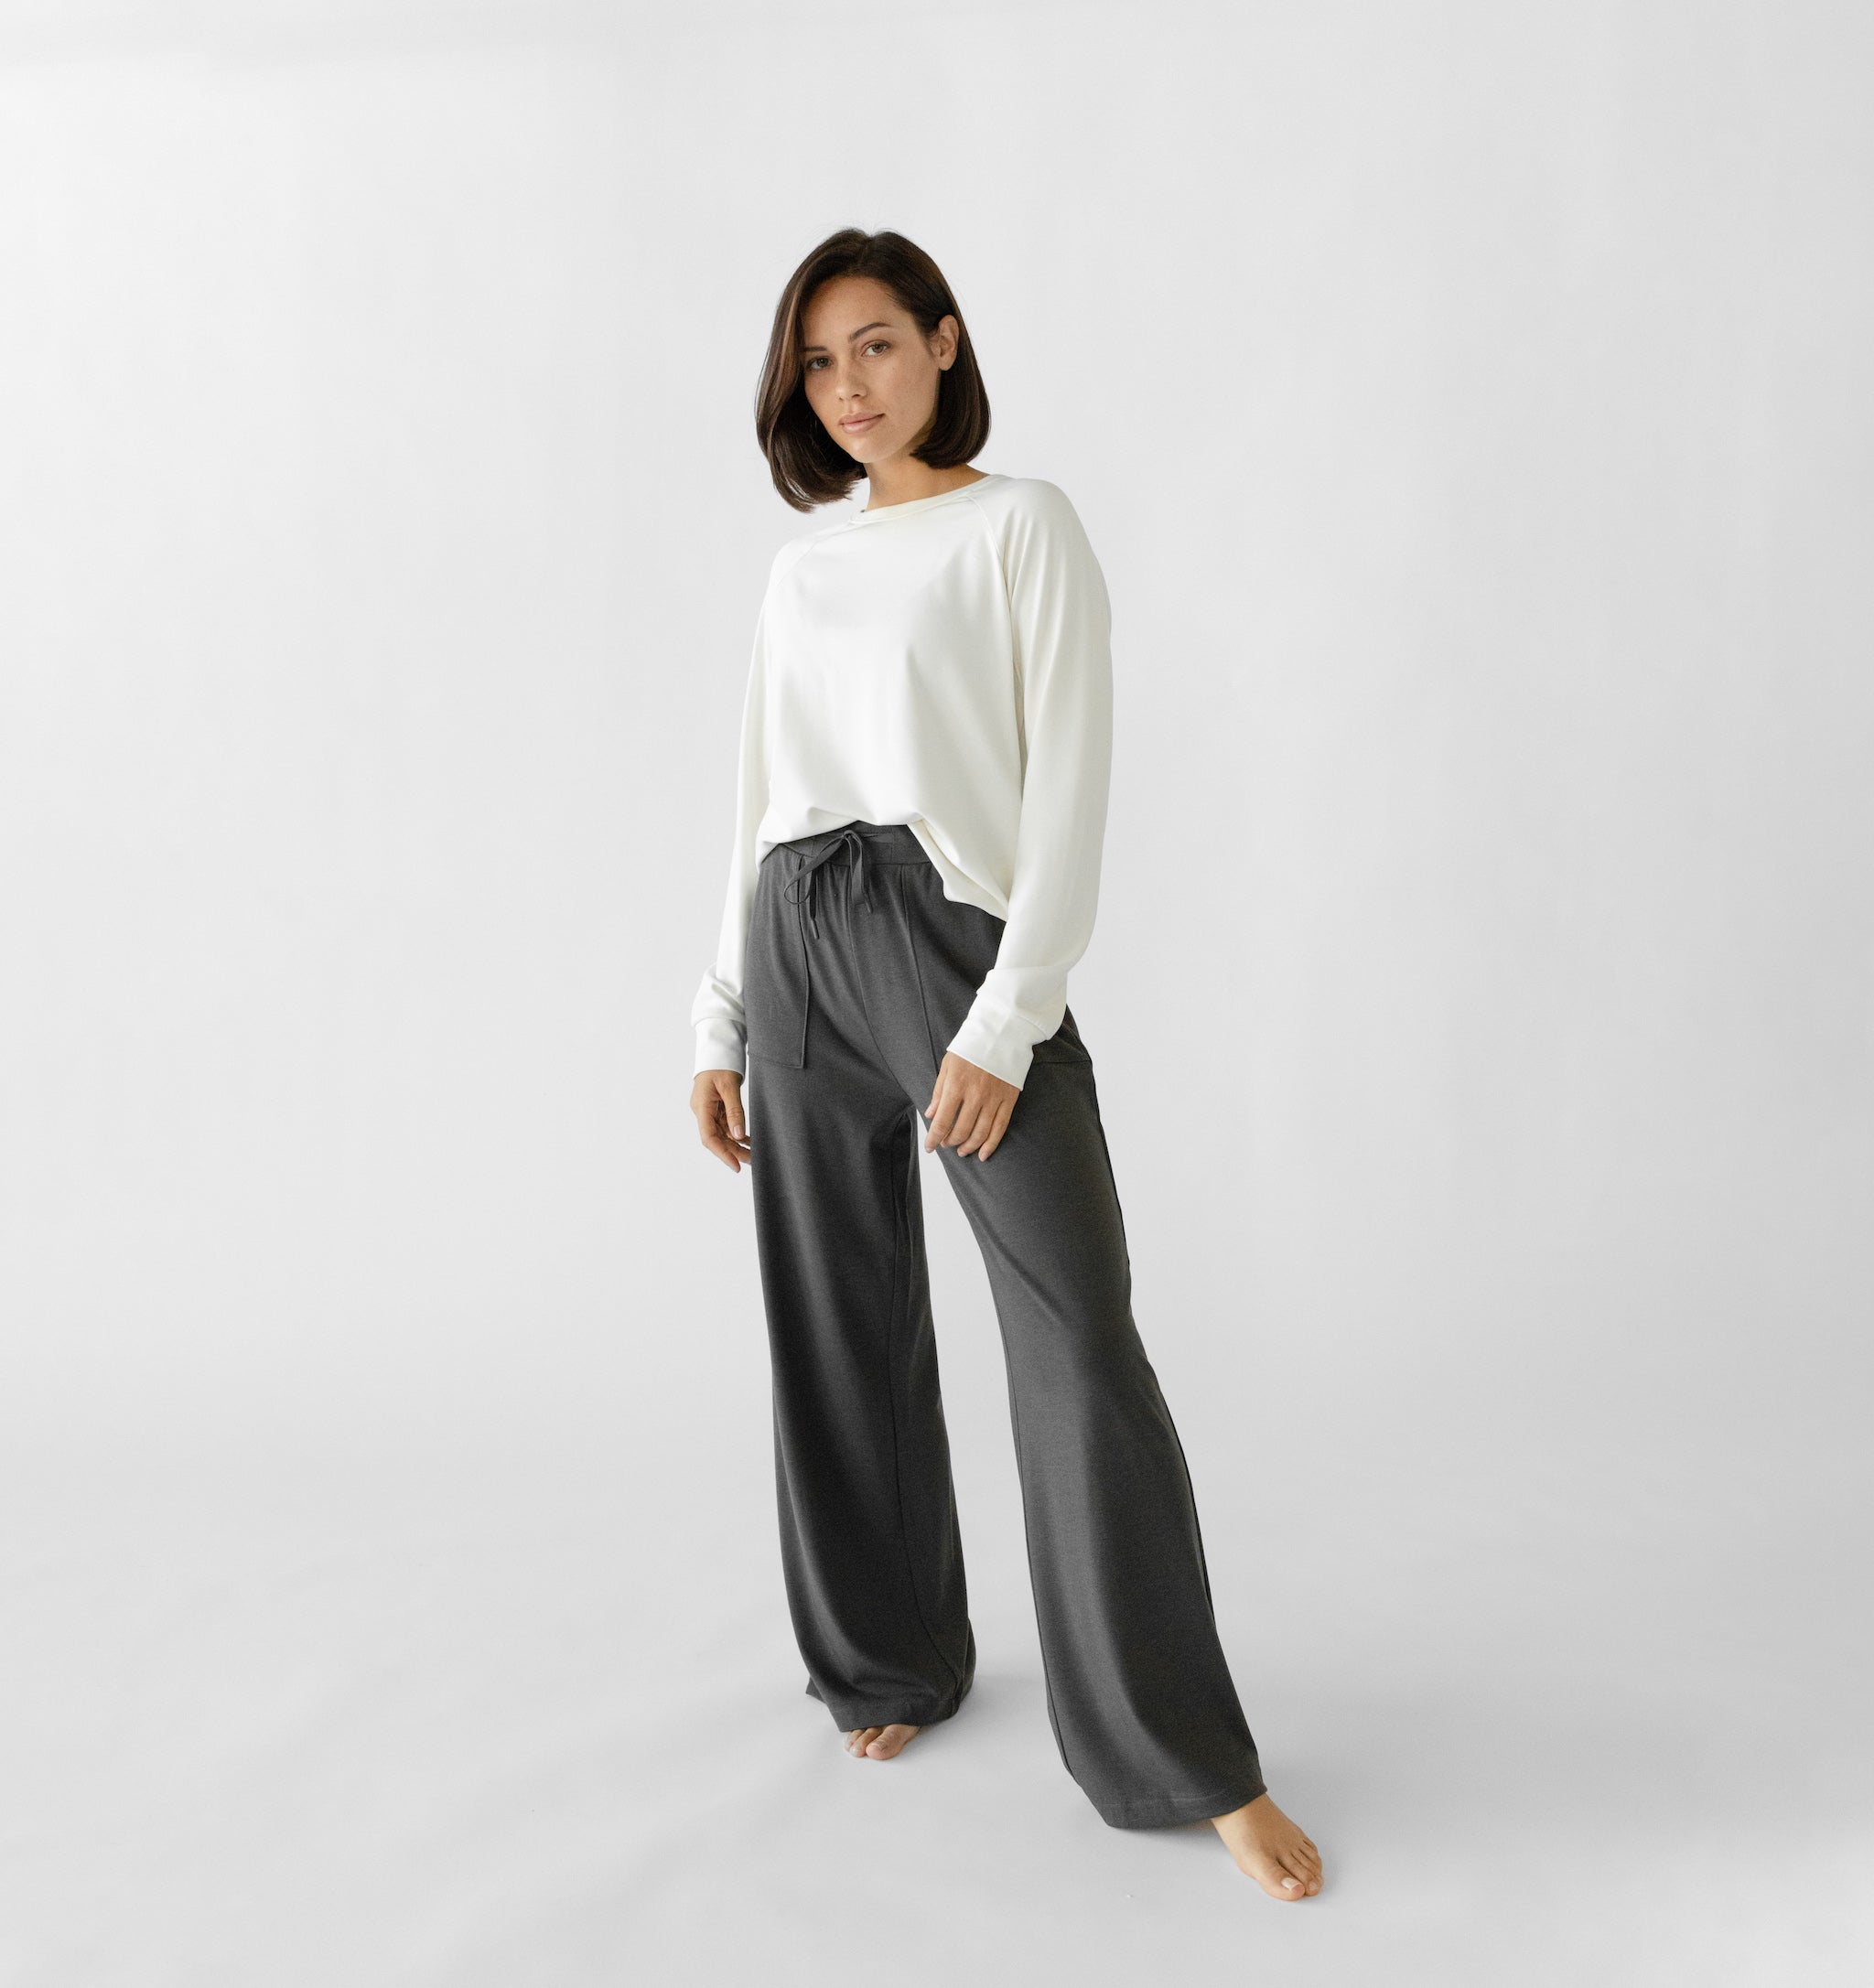 KIHOUT Pants For Women Deals Printing Elastic Loose Pants Straight Wide Leg  Trousers With Pocket 